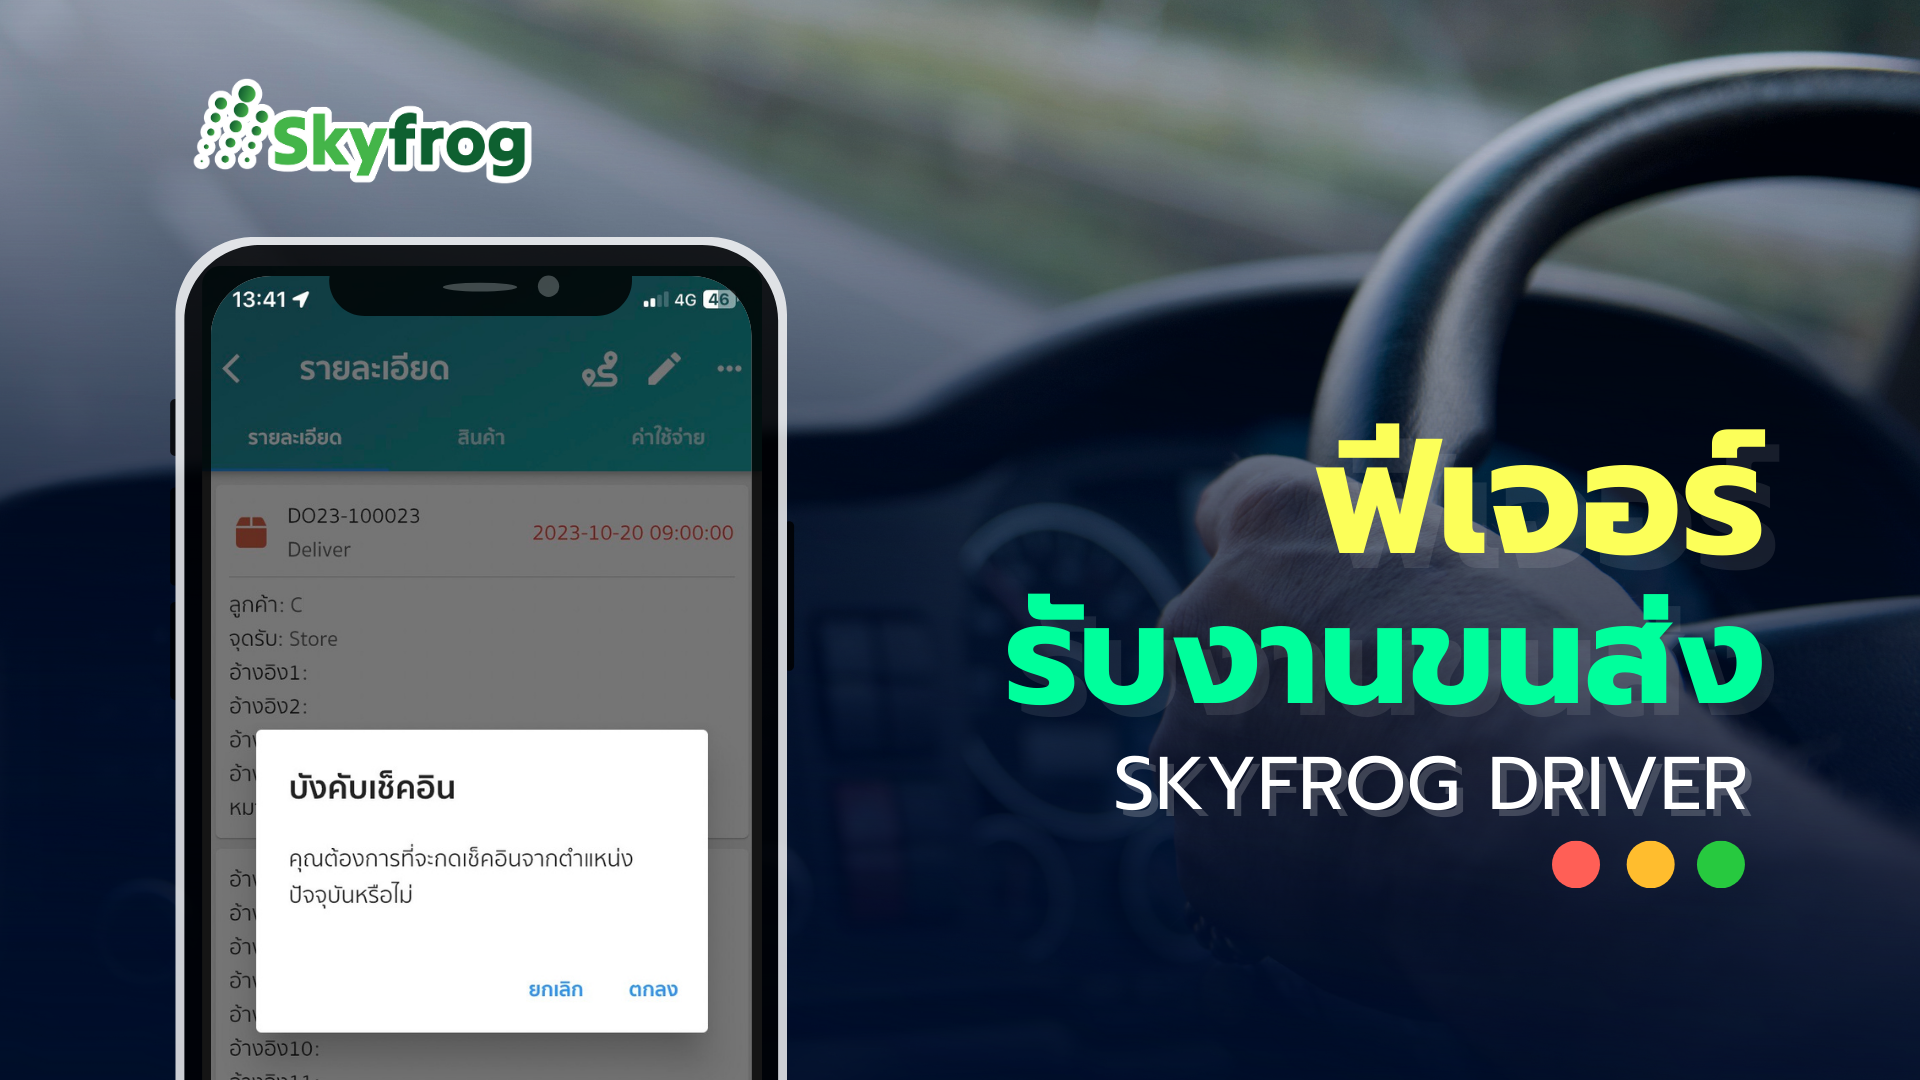 The Skyfrog Driver app is a mobile app that helps drivers manage their deliveries.